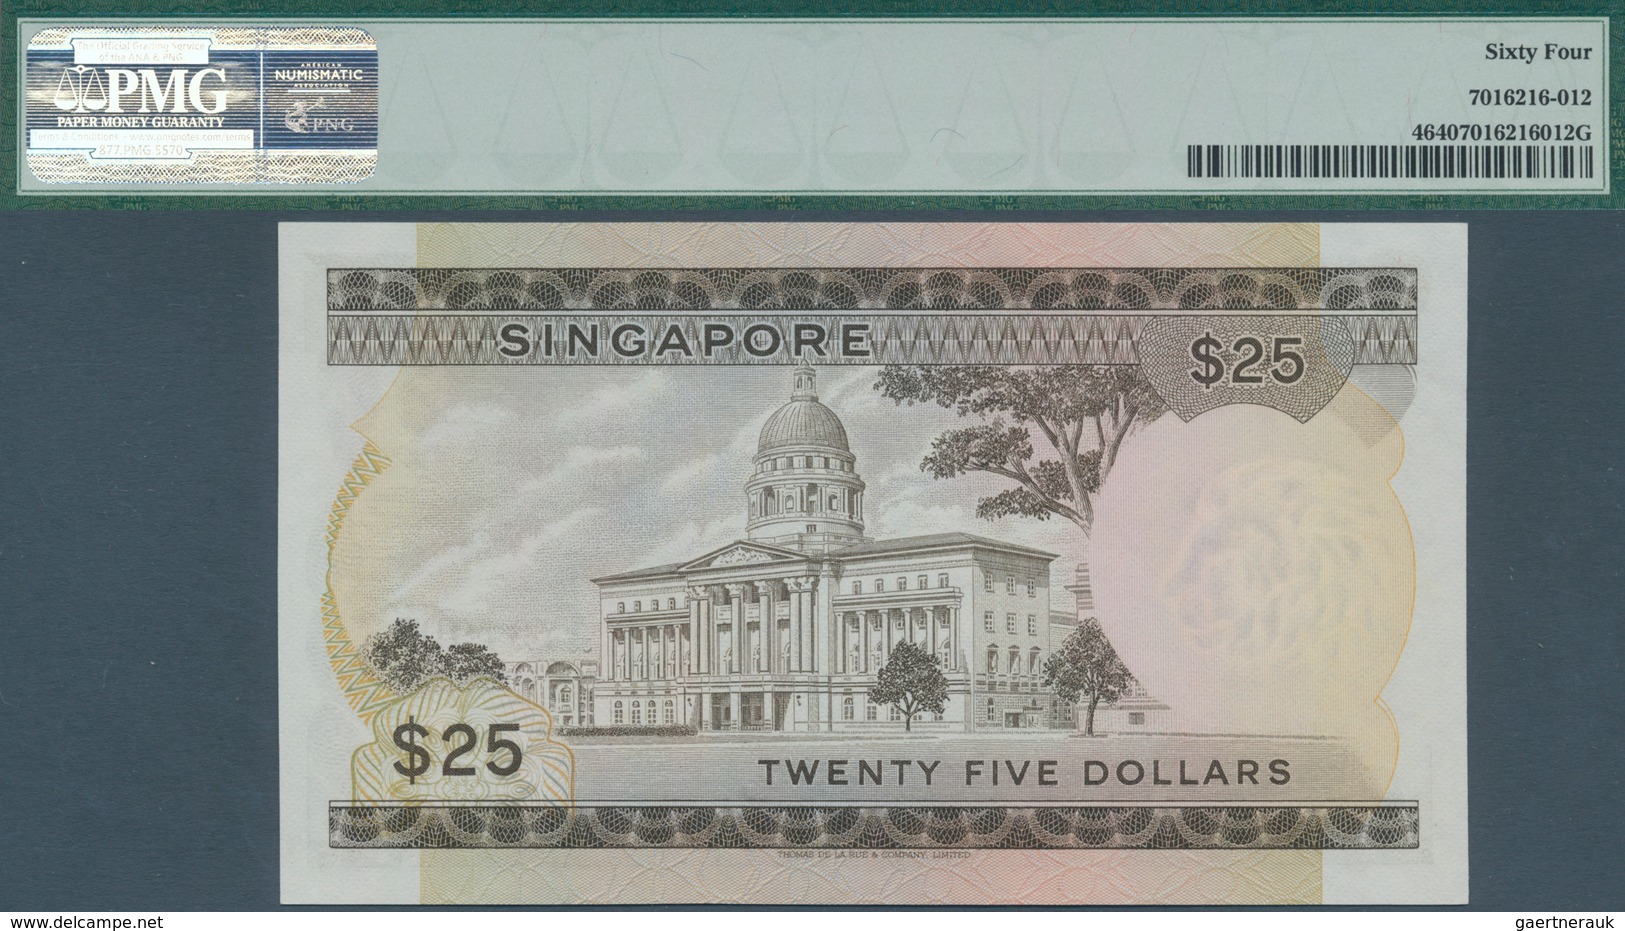 Singapore / Singapur: 25 Dollars ND(1972) P. 4 In Condition: PMG Graded 64 Choice UNC. - Singapore